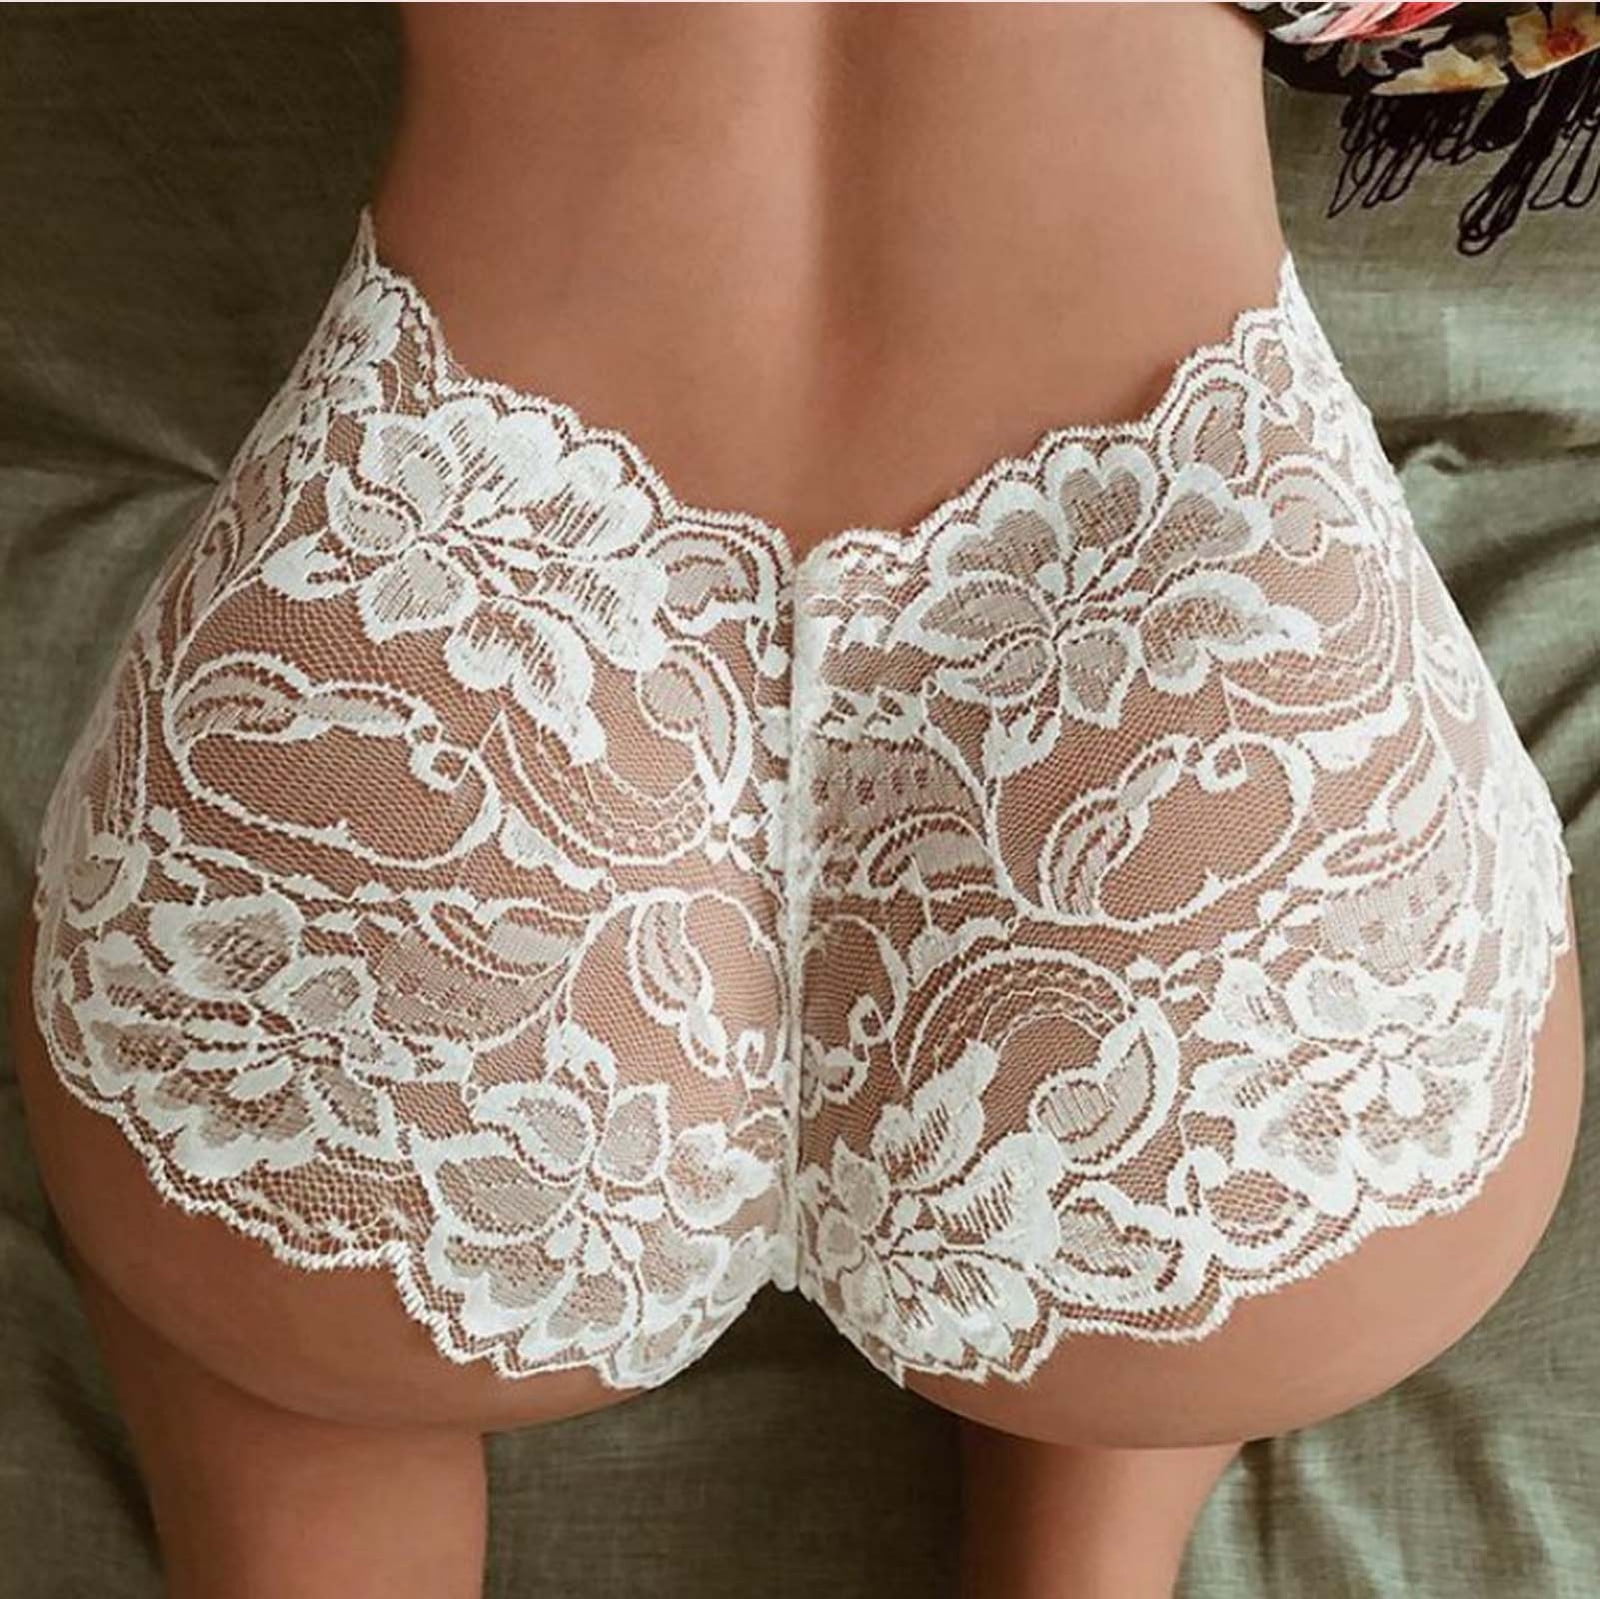 PEACHY Seamless Lace Panties Women Shapers High Waist Slimming Tummy Control